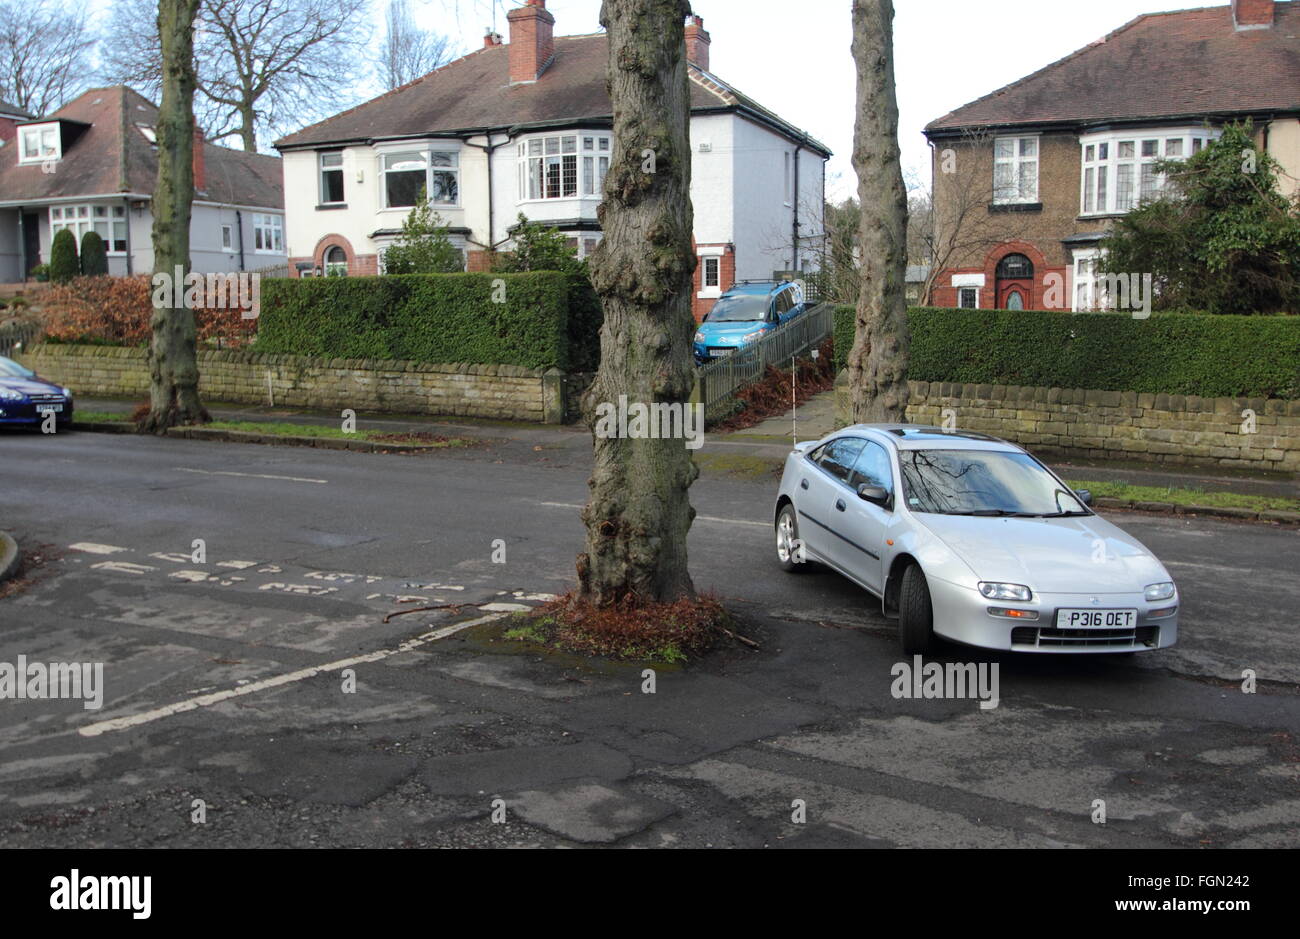 A car navigates a tree growing in the middle of a t-junction on a road in a leafy suburb of the city of Sheffield, England UK Stock Photo